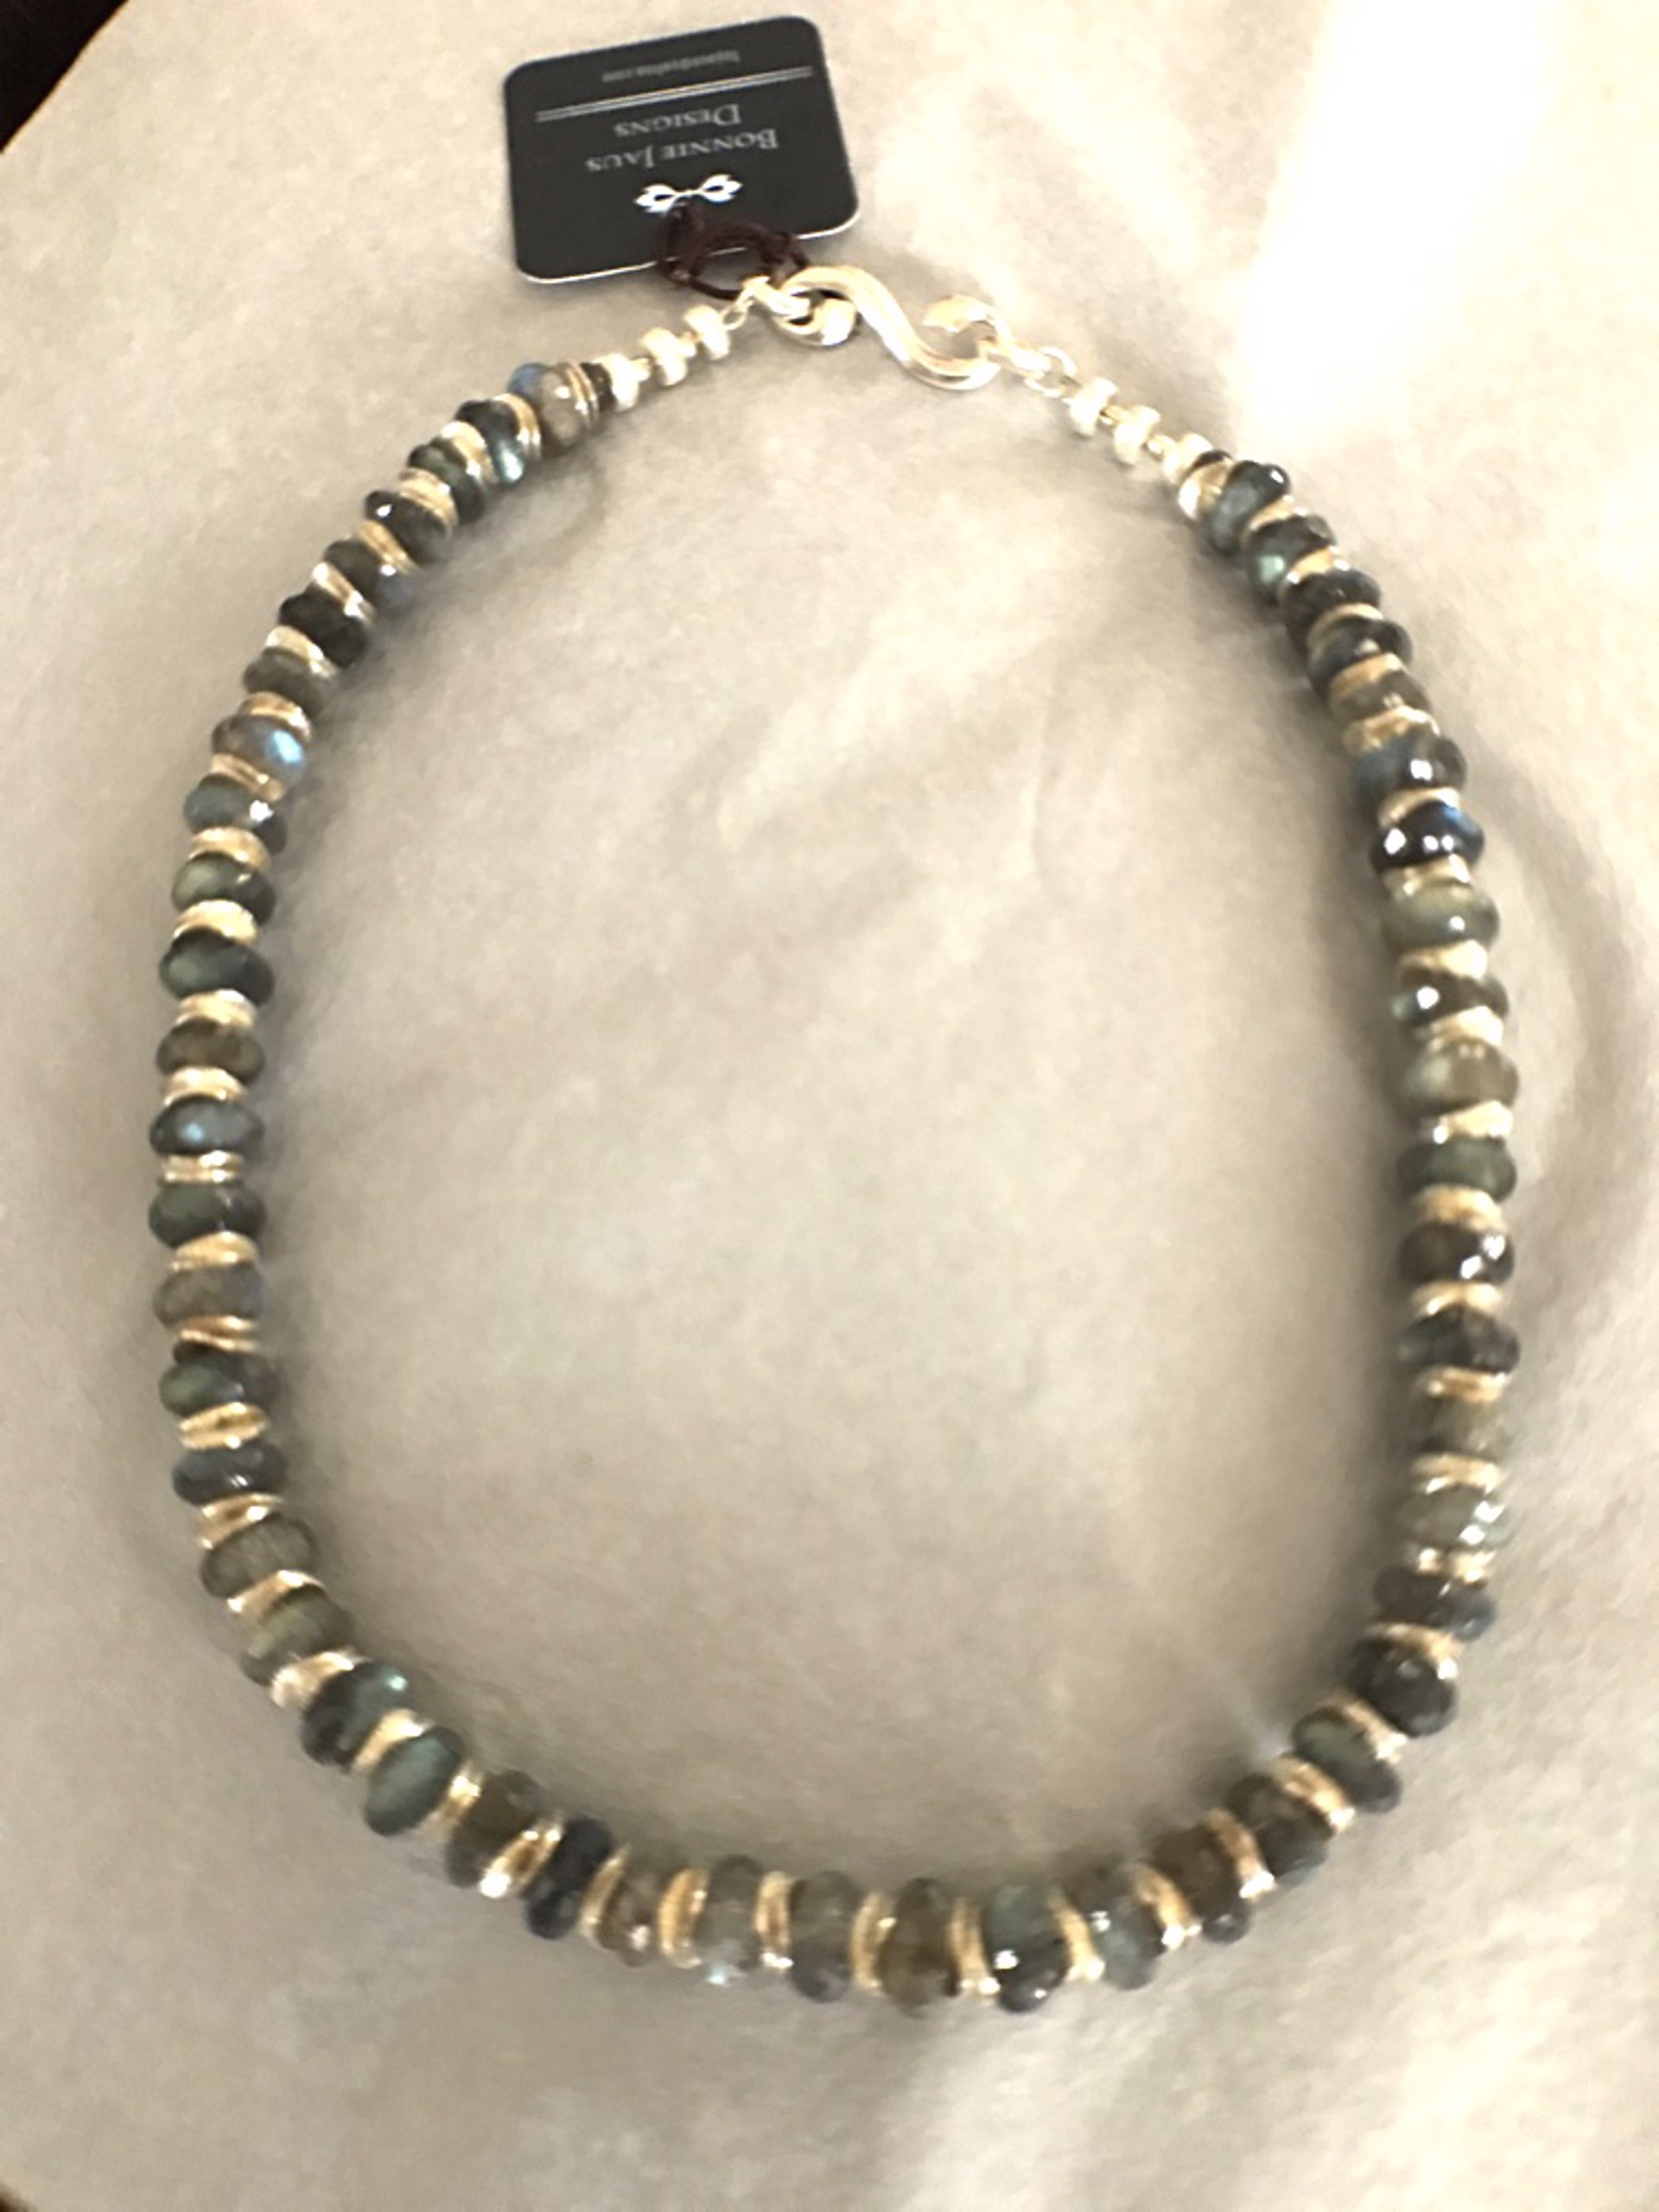 Necklace - Labradorite & Sterling Silver  #8675 by Bonnie Jaus